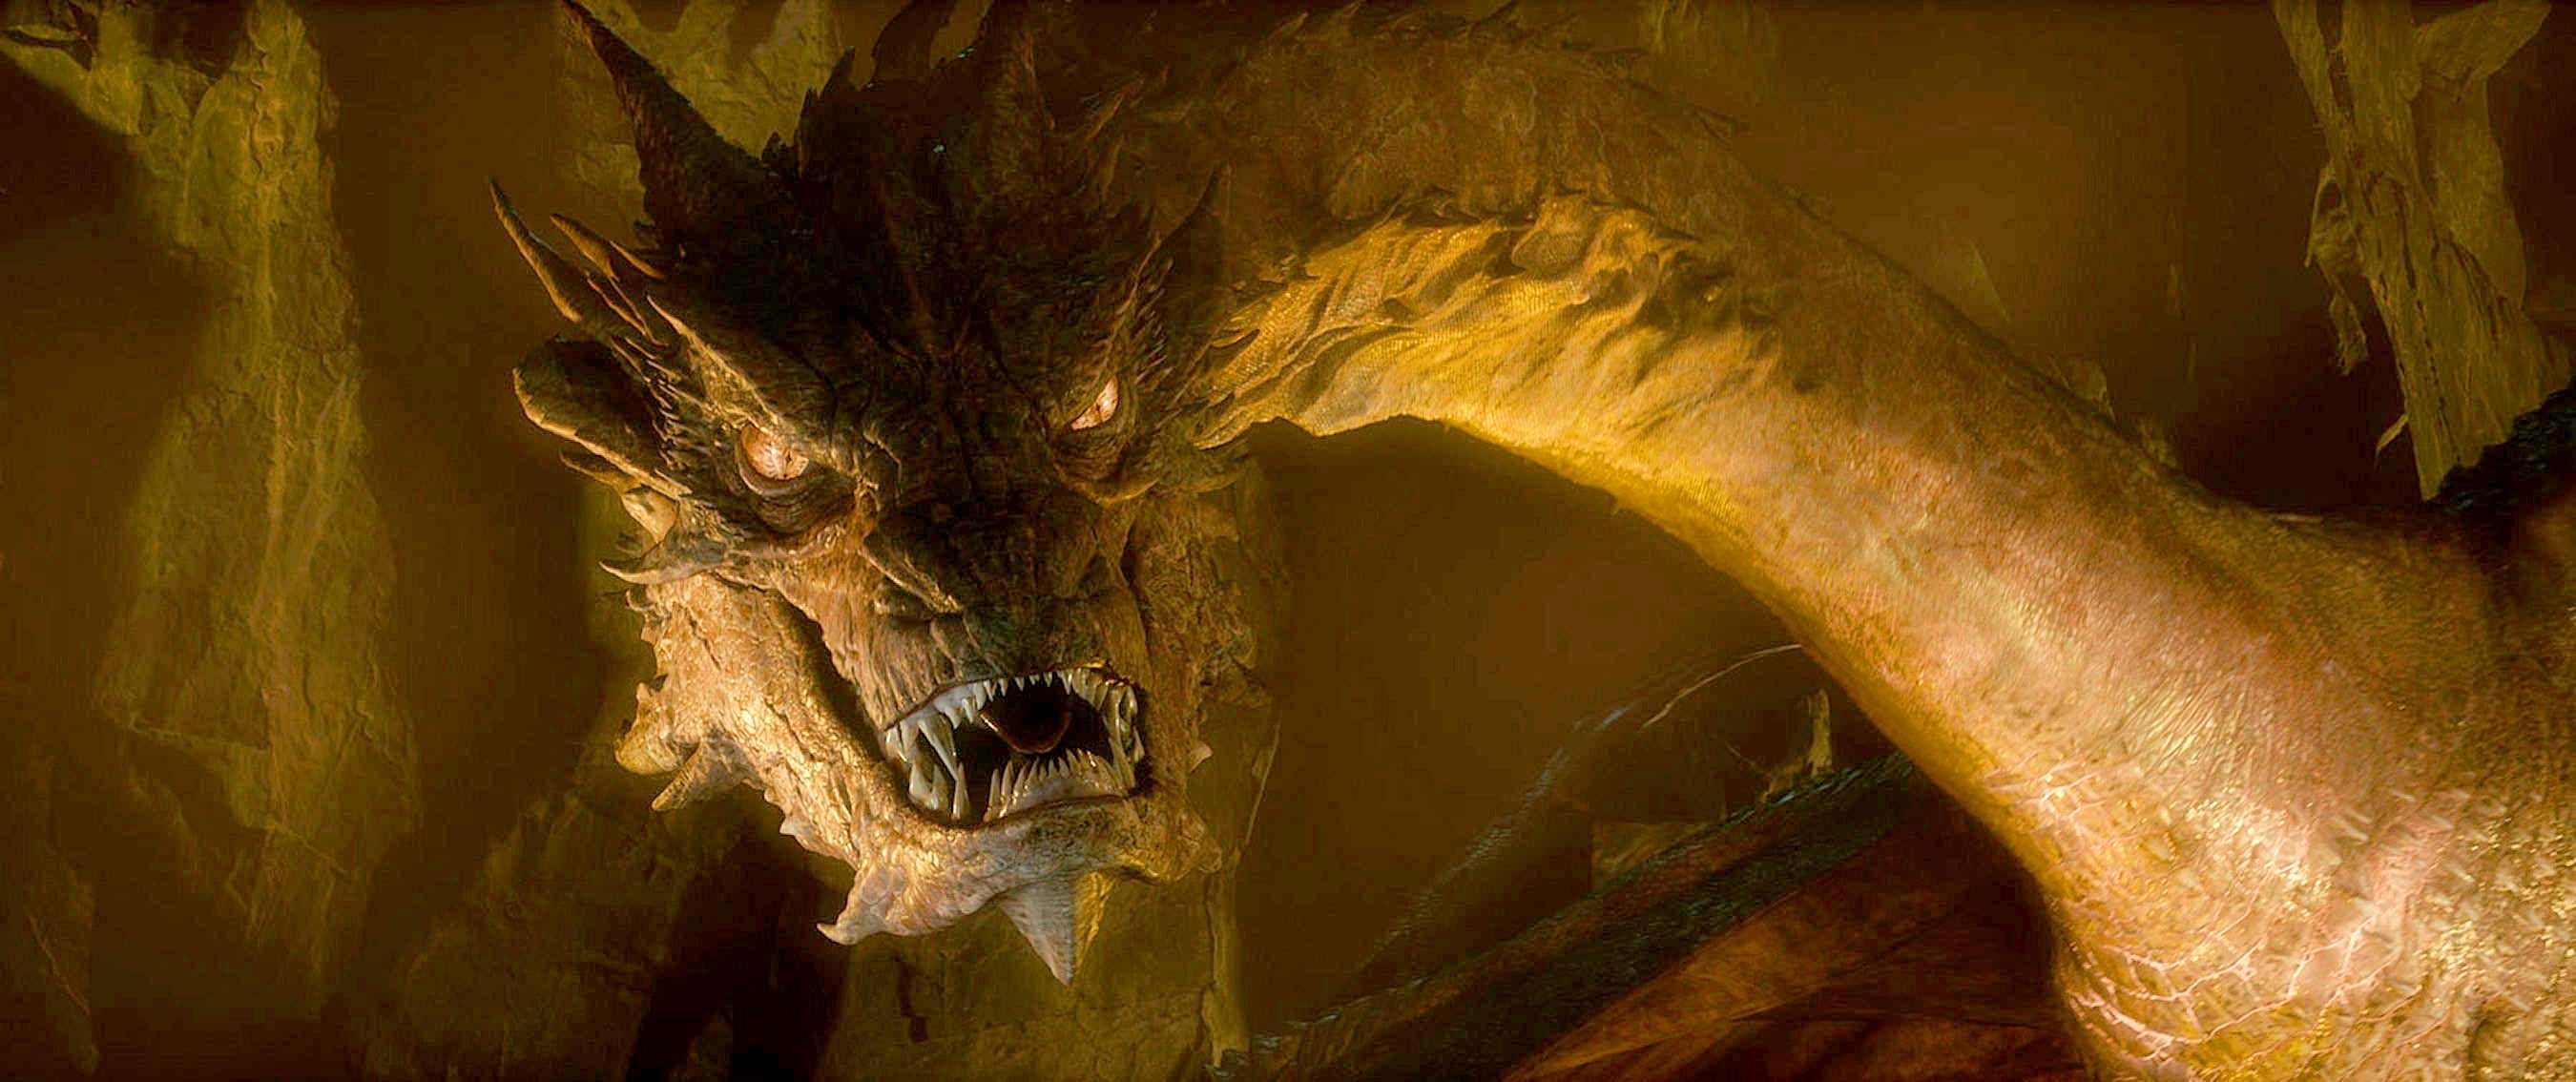 Smaug covered in gold